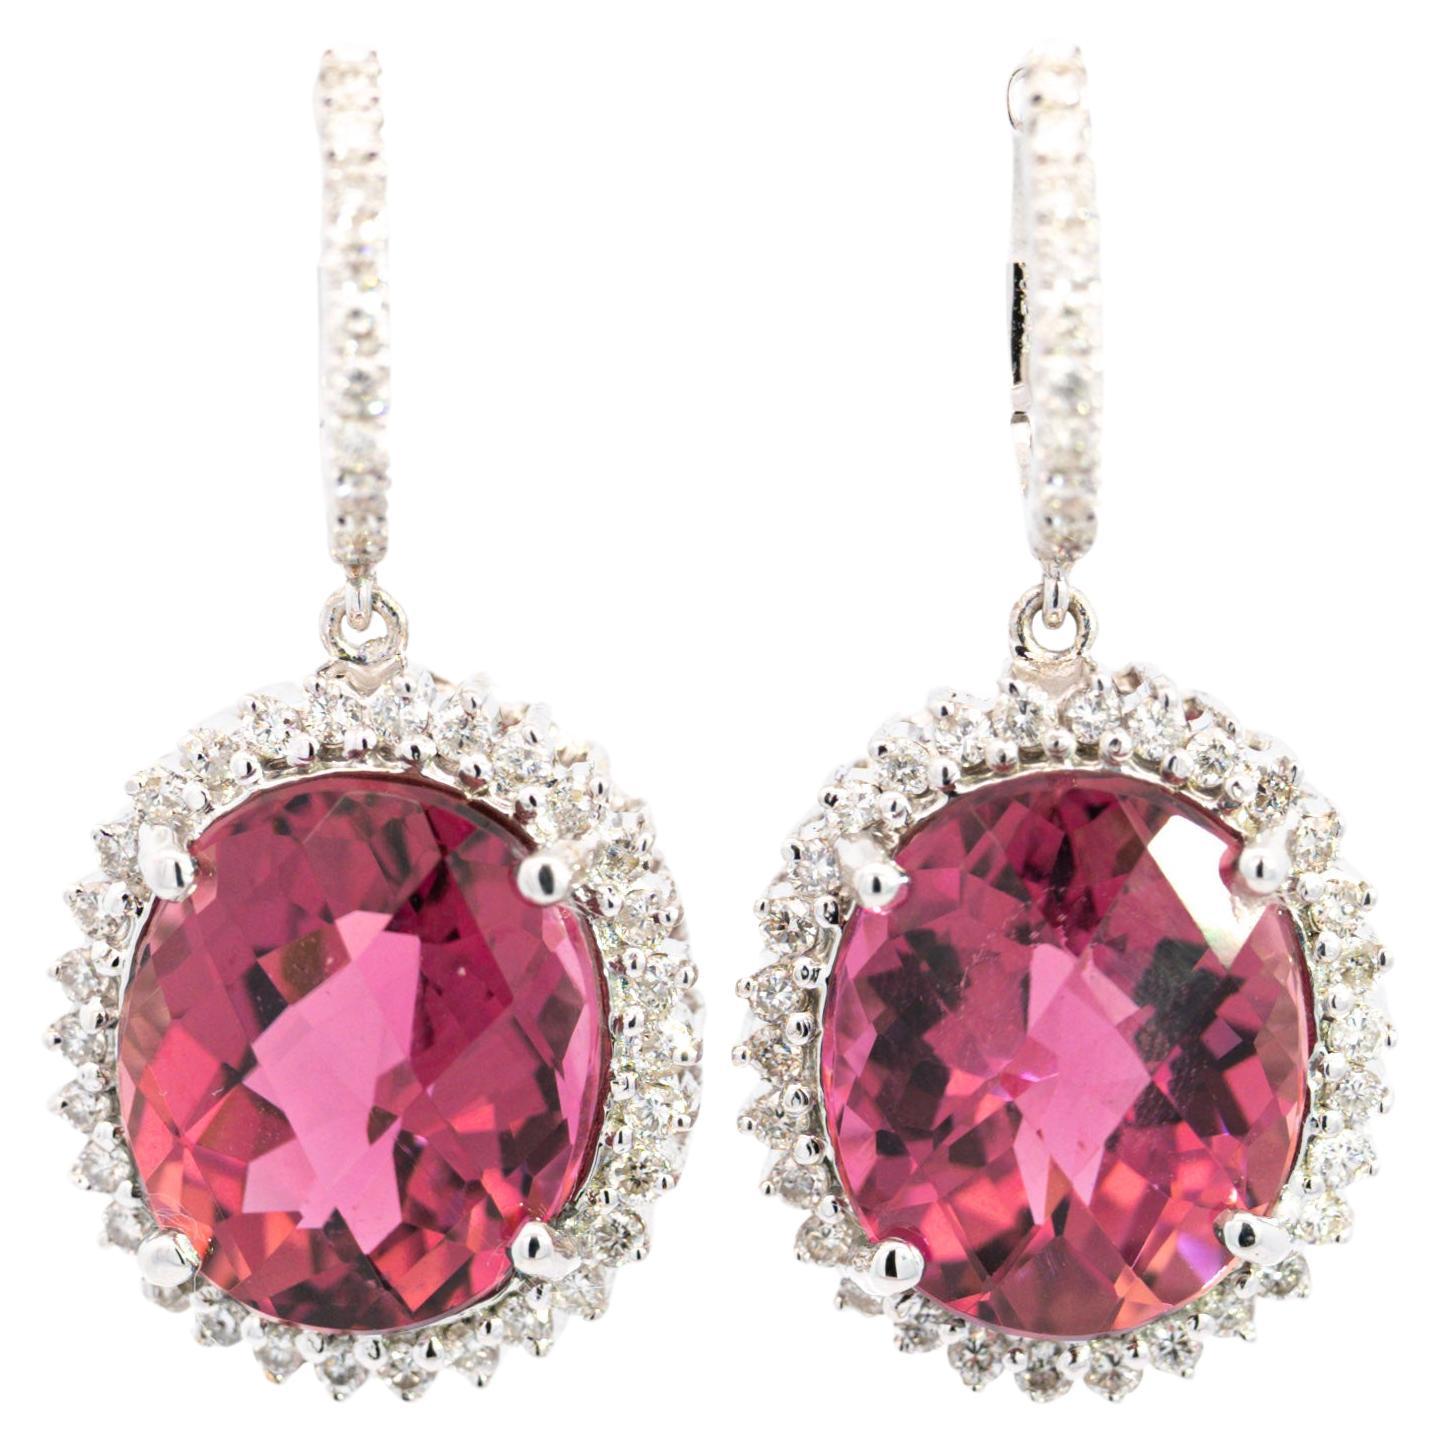 16 Carat Checkerboard Oval-Cut Pink Tourmaline and Diamond Halo Drop Earrings For Sale